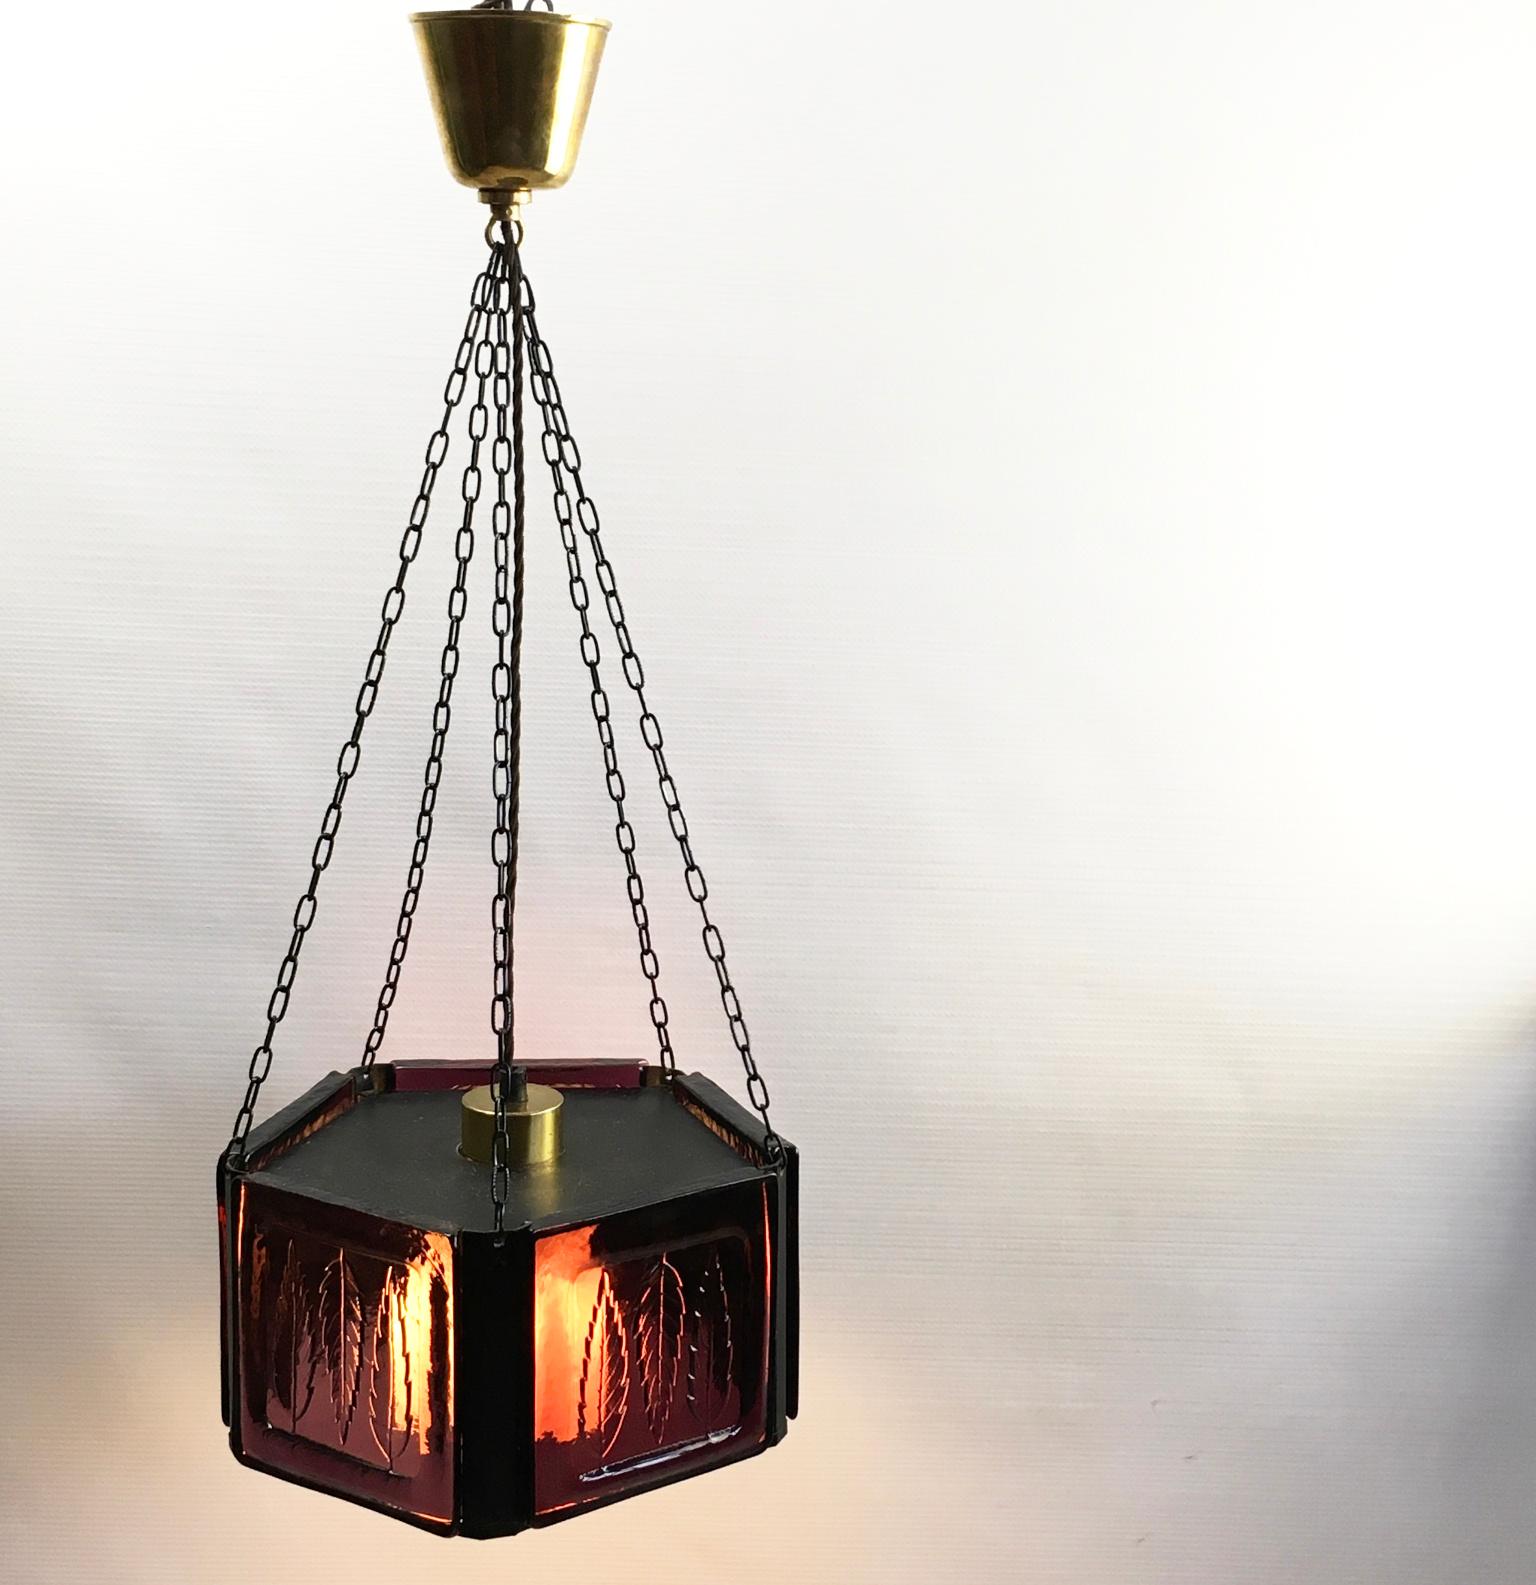 Hand-Crafted Pendant Lamp by Erik Höglund with Purple Glass for Boda Glasburk, Sweden, 1960s For Sale